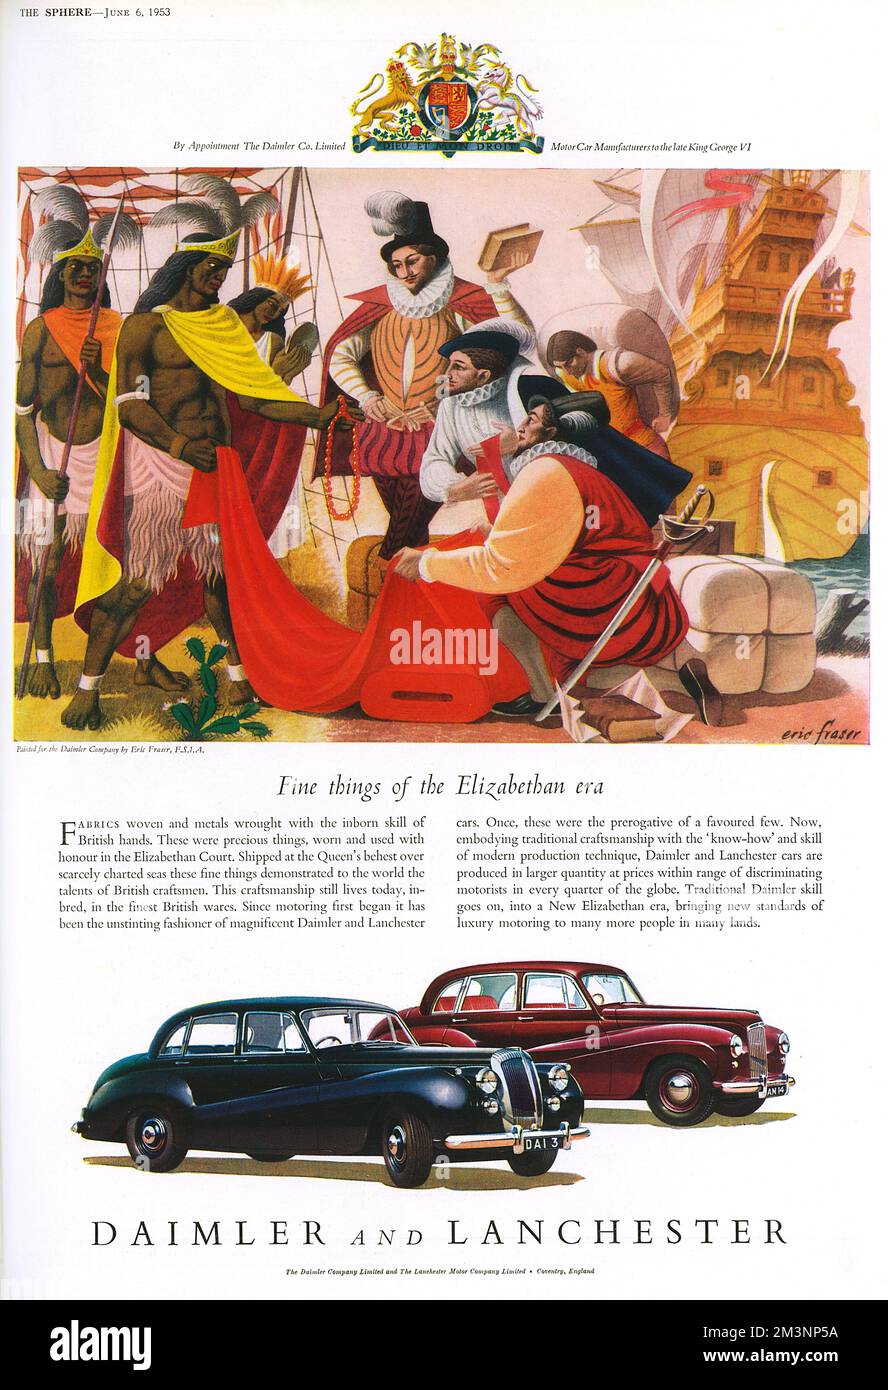 In celebration of a new Elizabethan era, Daimler and Lanchester invoke the British successes in manufacturing under Elizabeth I. The illustration features Elizabethan tradesmen alighting in the Americas, and underneath two Daimler and Lanchester cars.     Date: 1953 Stock Photo